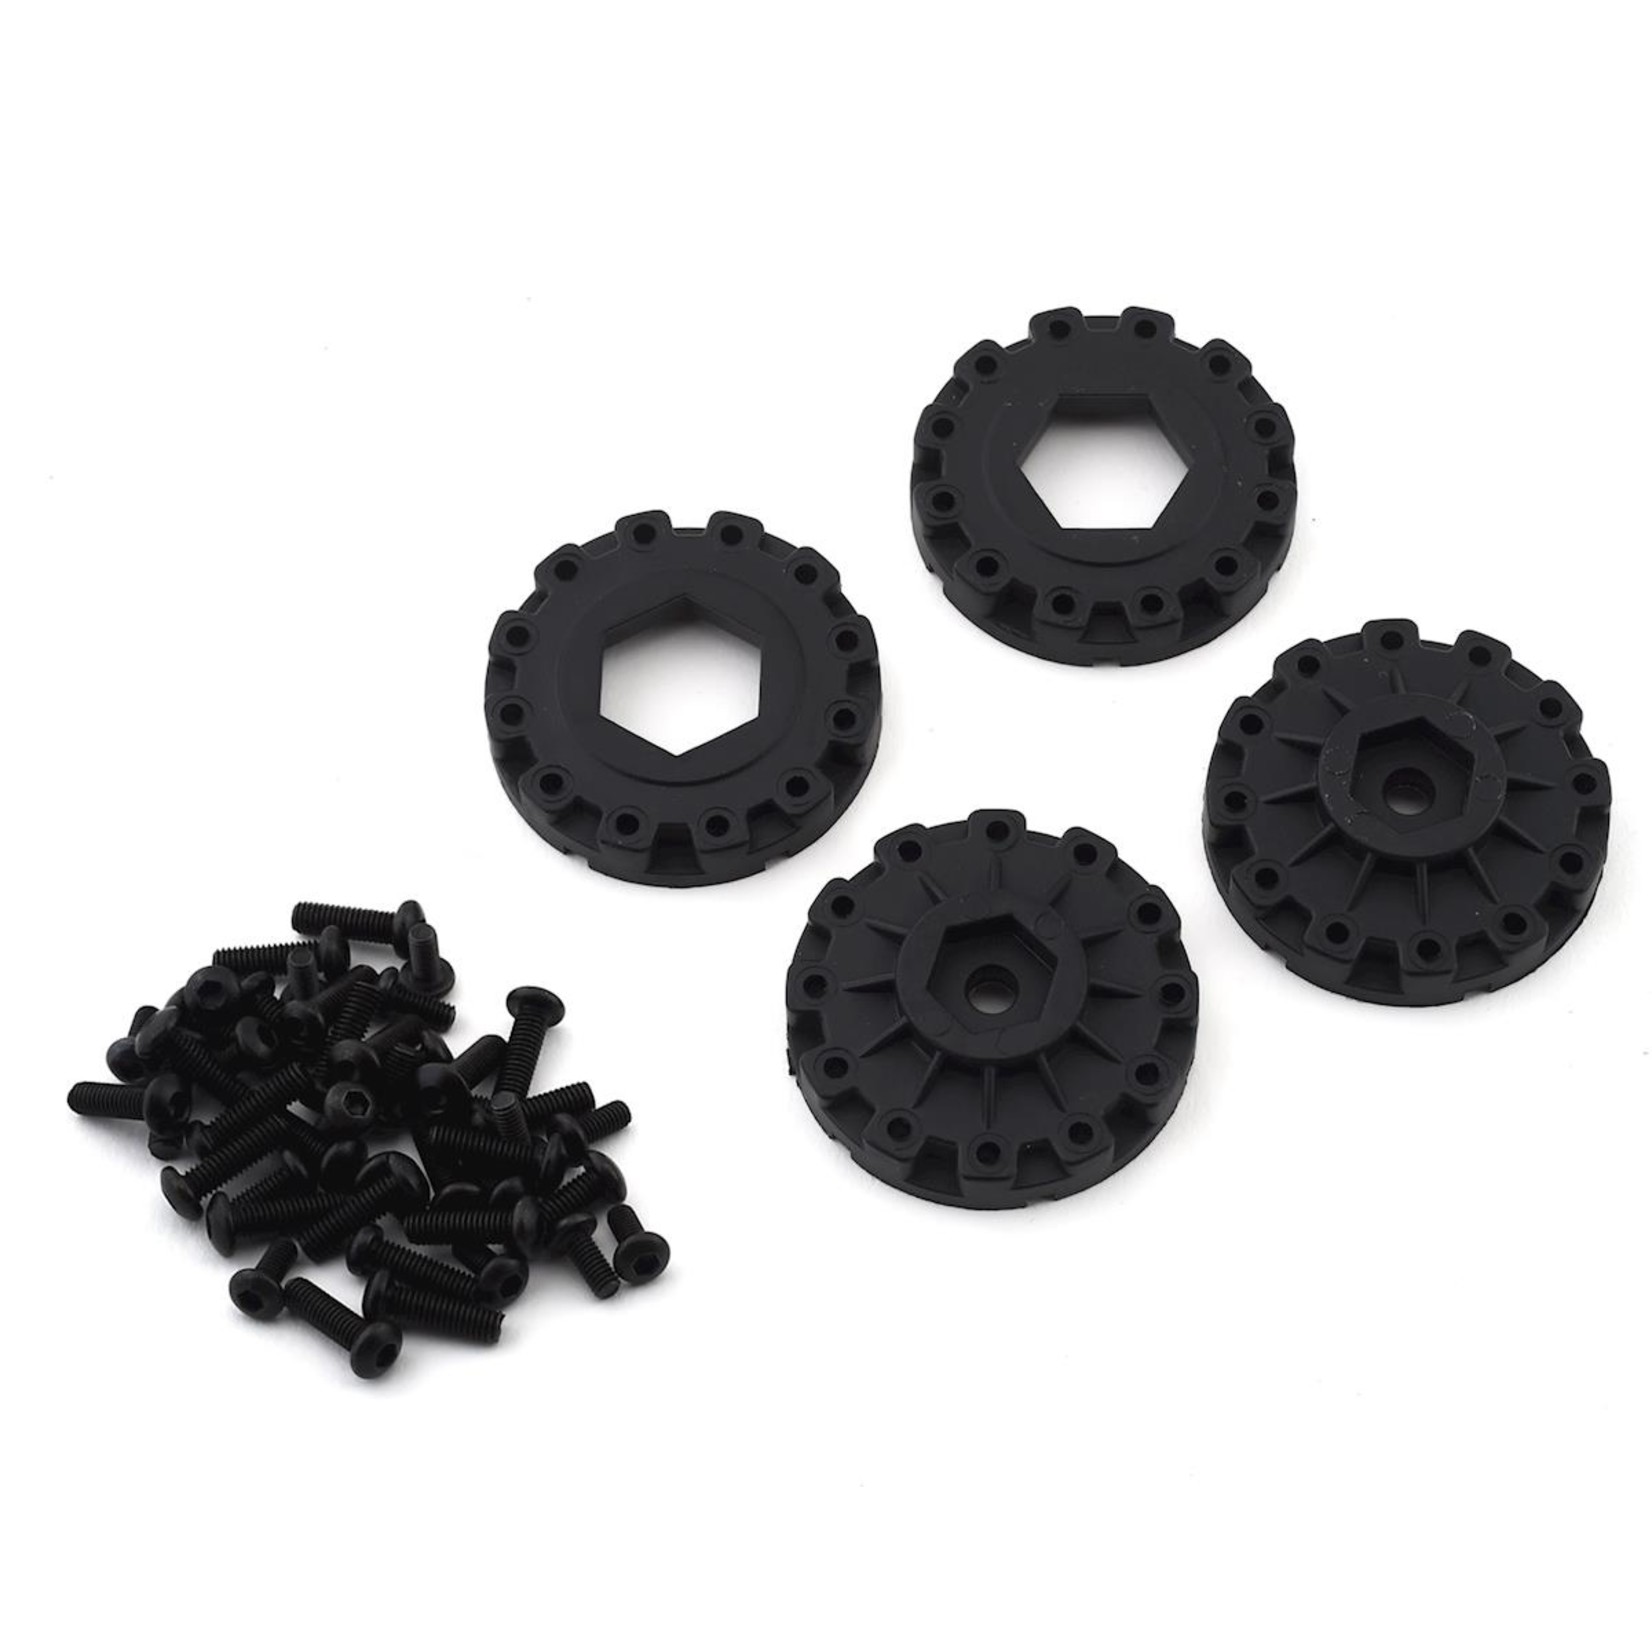 JConcepts JConcepts Speed Claw Belted Tire Pre-Mounted w/Cheetah Speed-Run Wheel (Black) (2) #3113-39